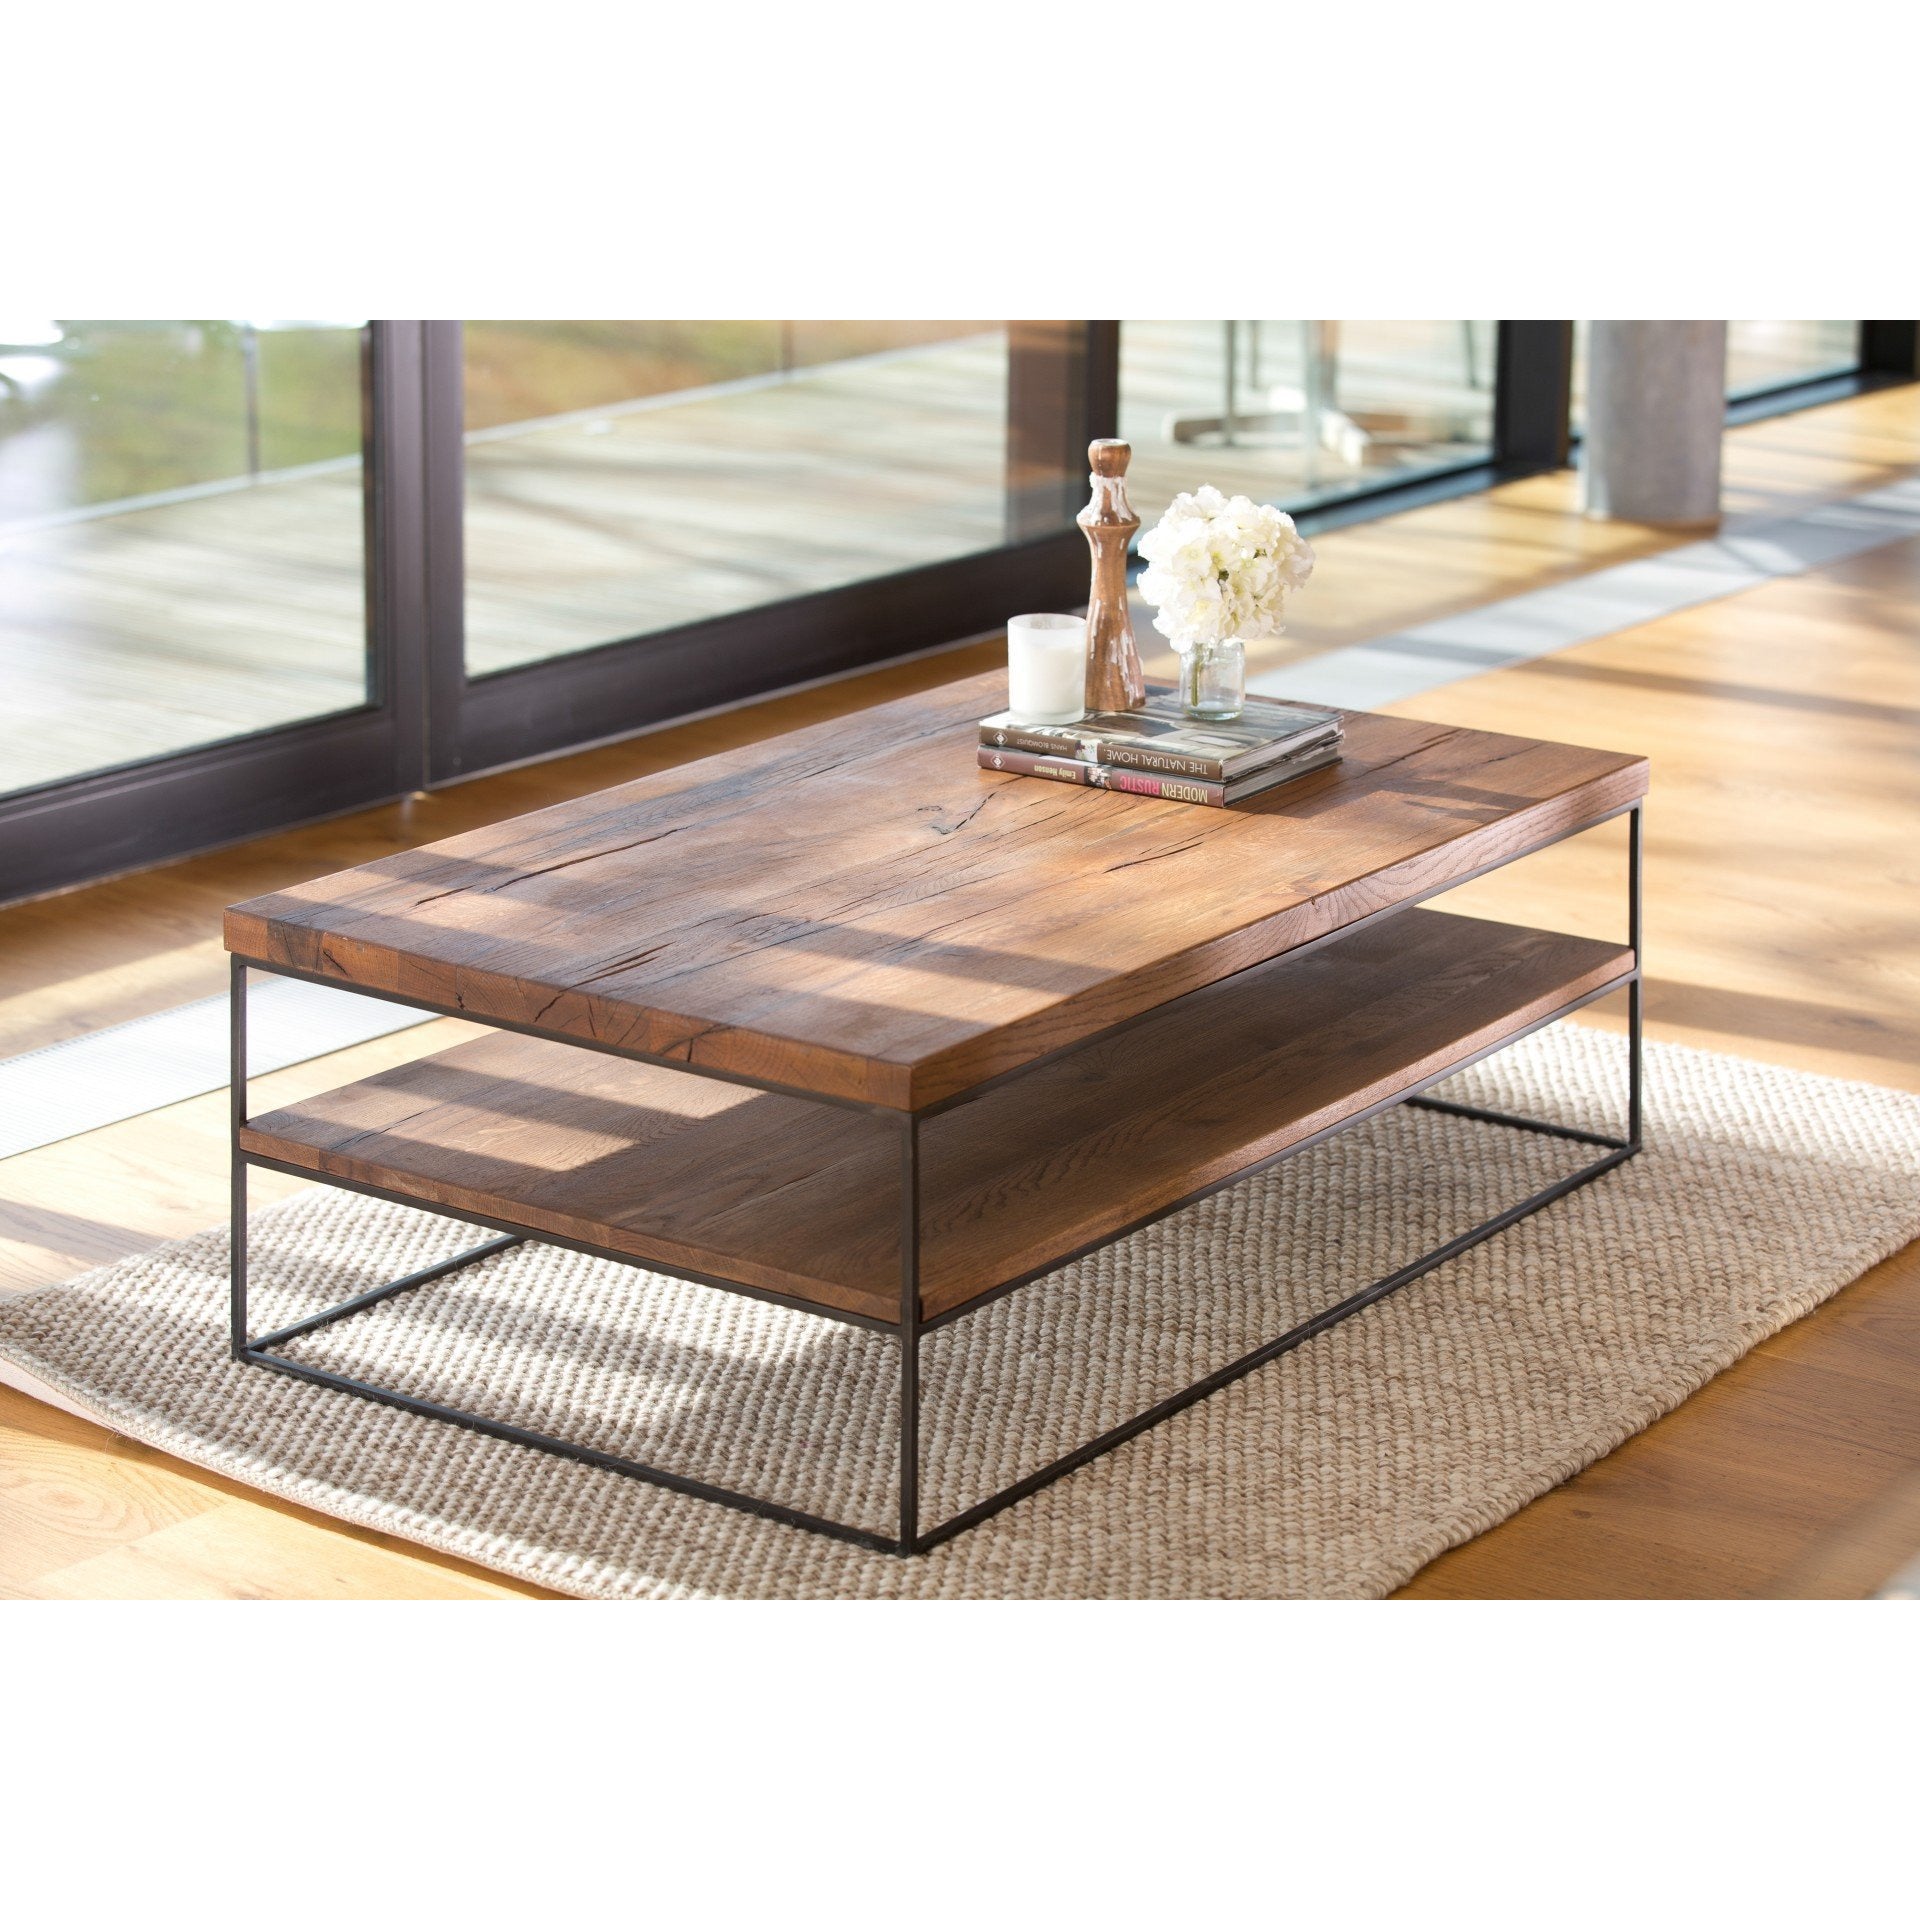 Soho Coffee Table from Upstairs Downstairs Furniture in Lisburn, Monaghan and Enniskillen